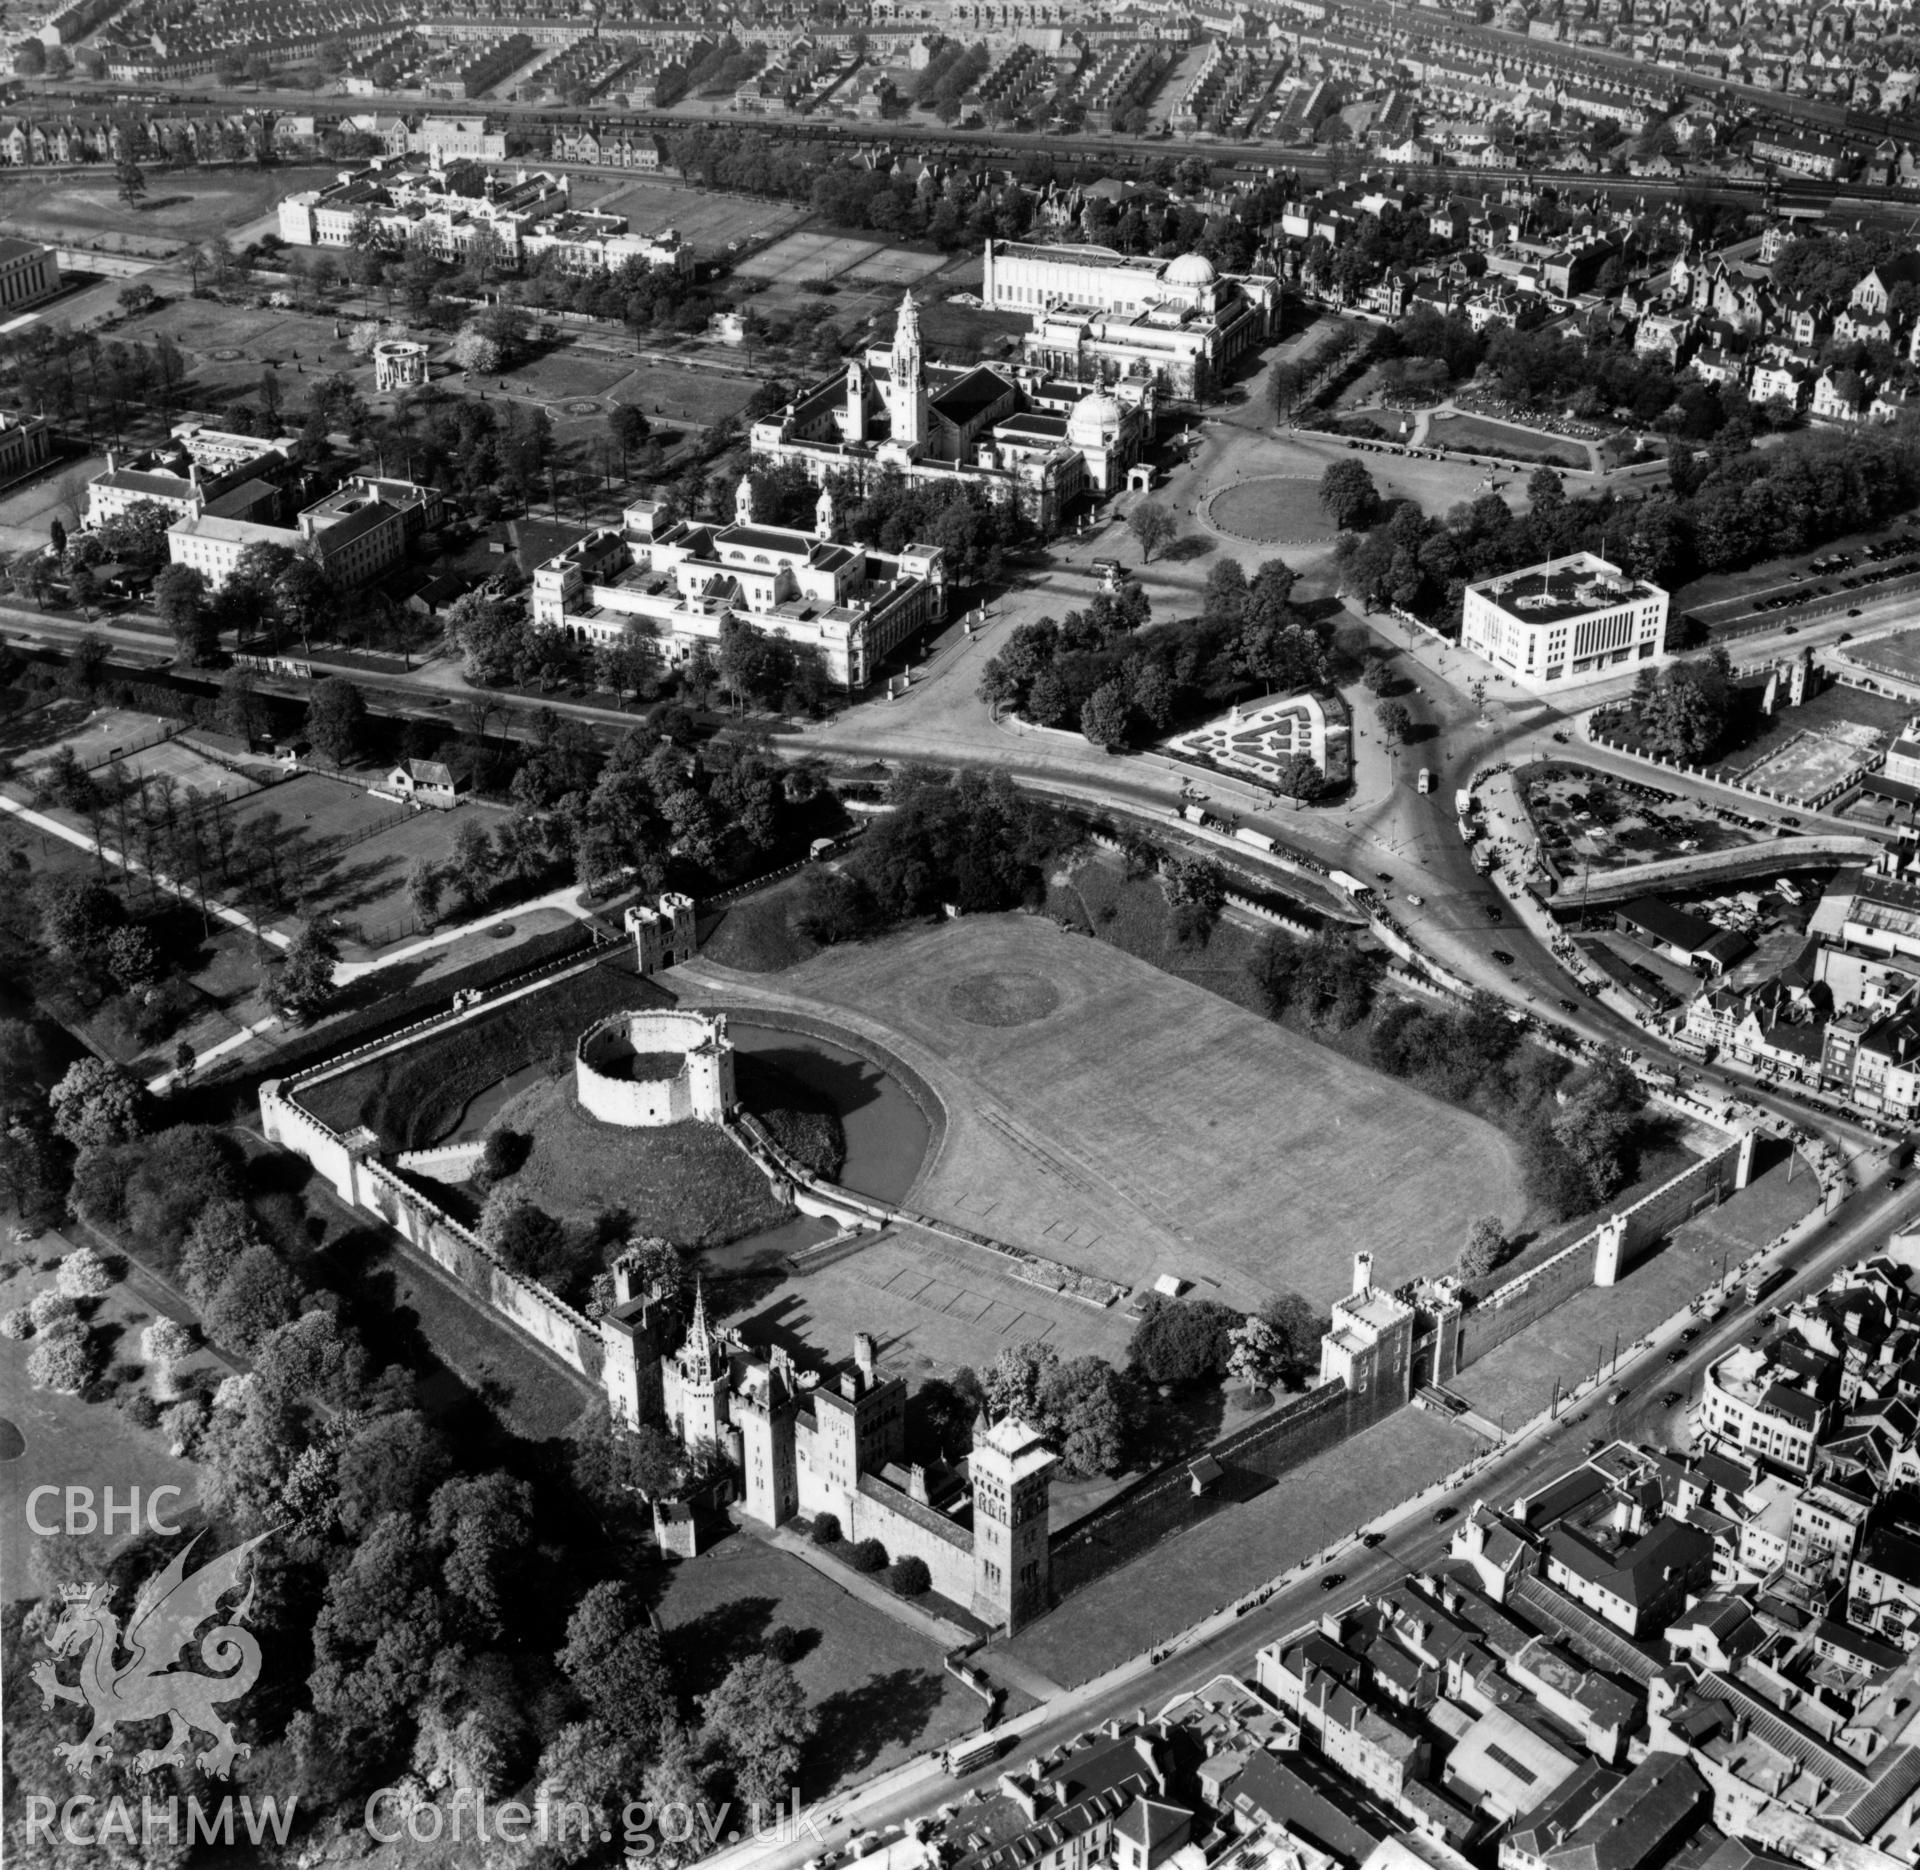 View of central Cardiff showing castle. Oblique aerial photograph, 5?" cut roll film.